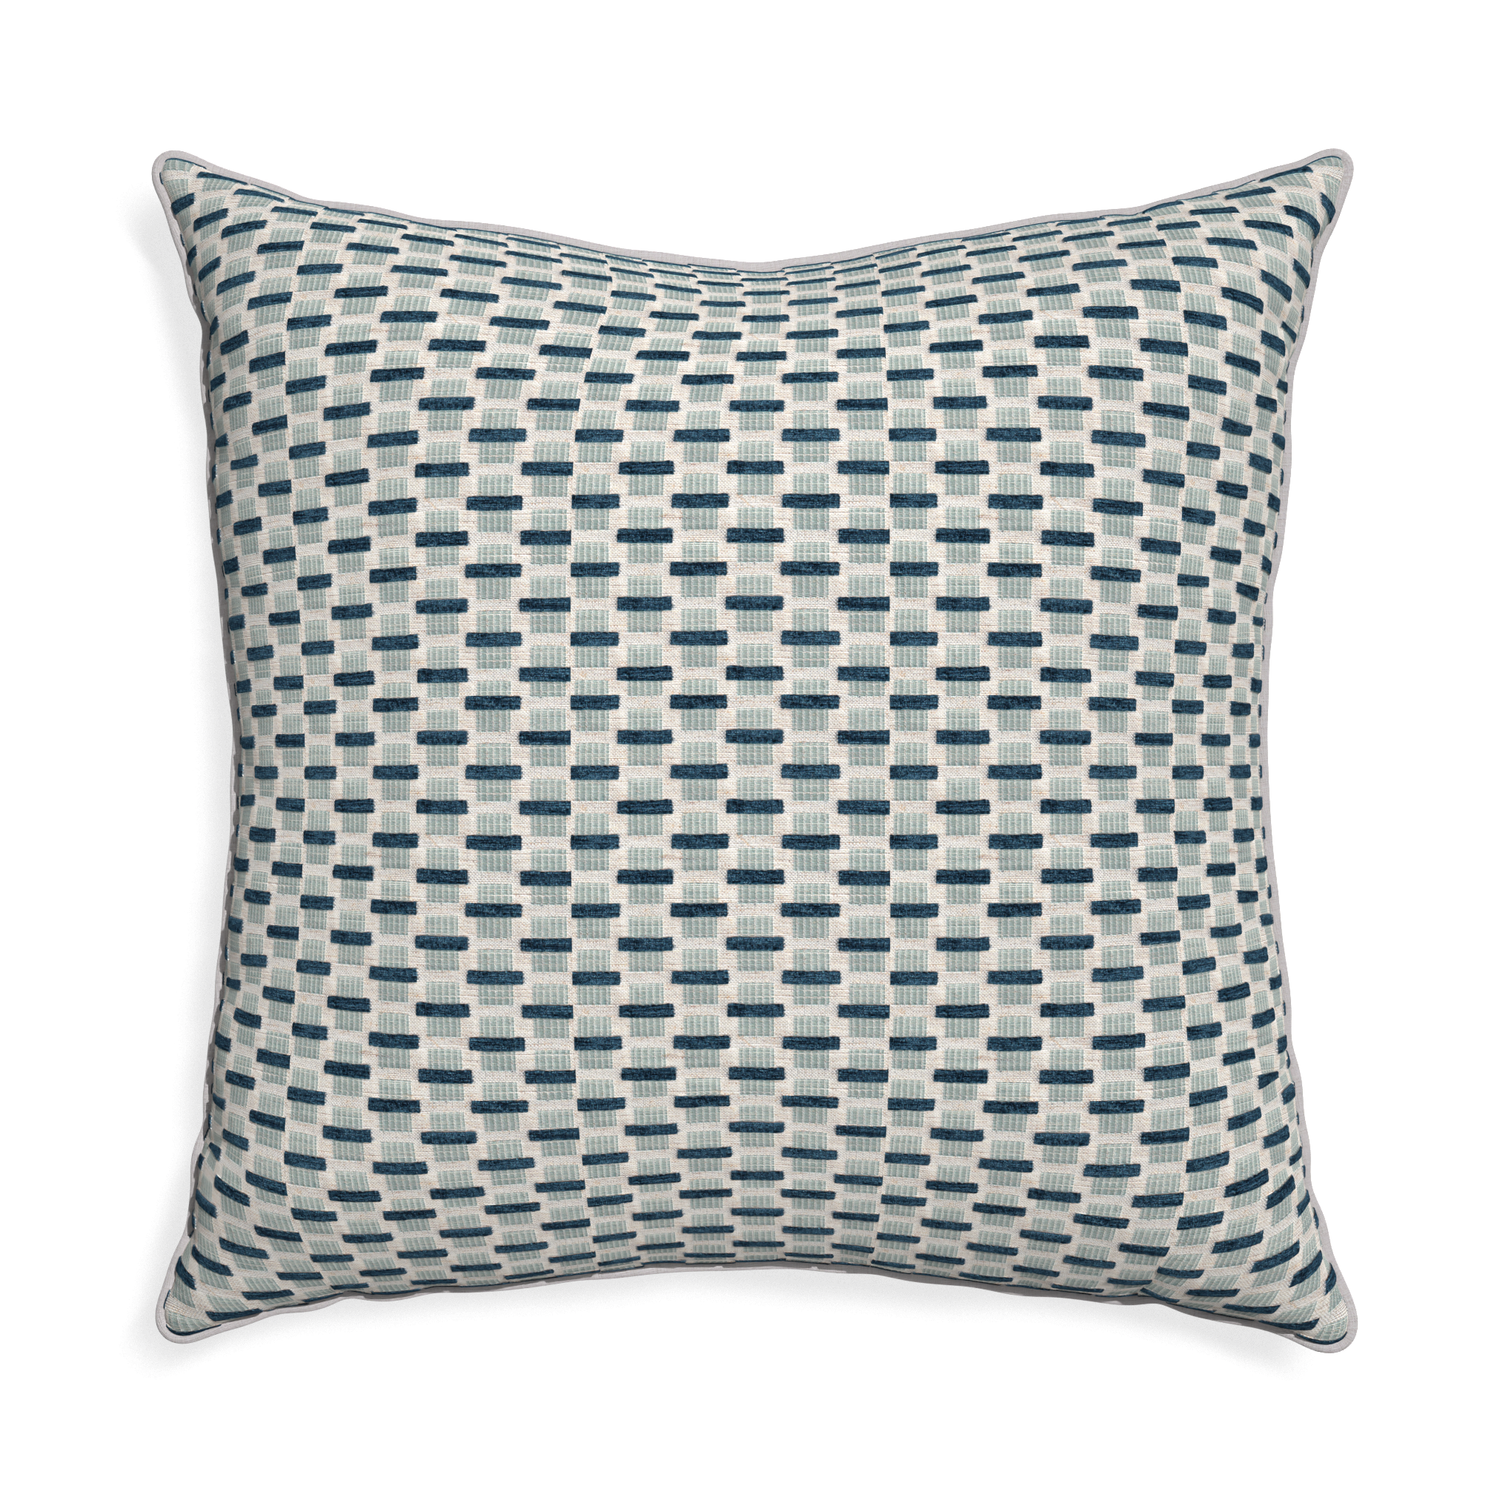 Euro-sham willow amalfi custom blue geometric chenillepillow with pebble piping on white background